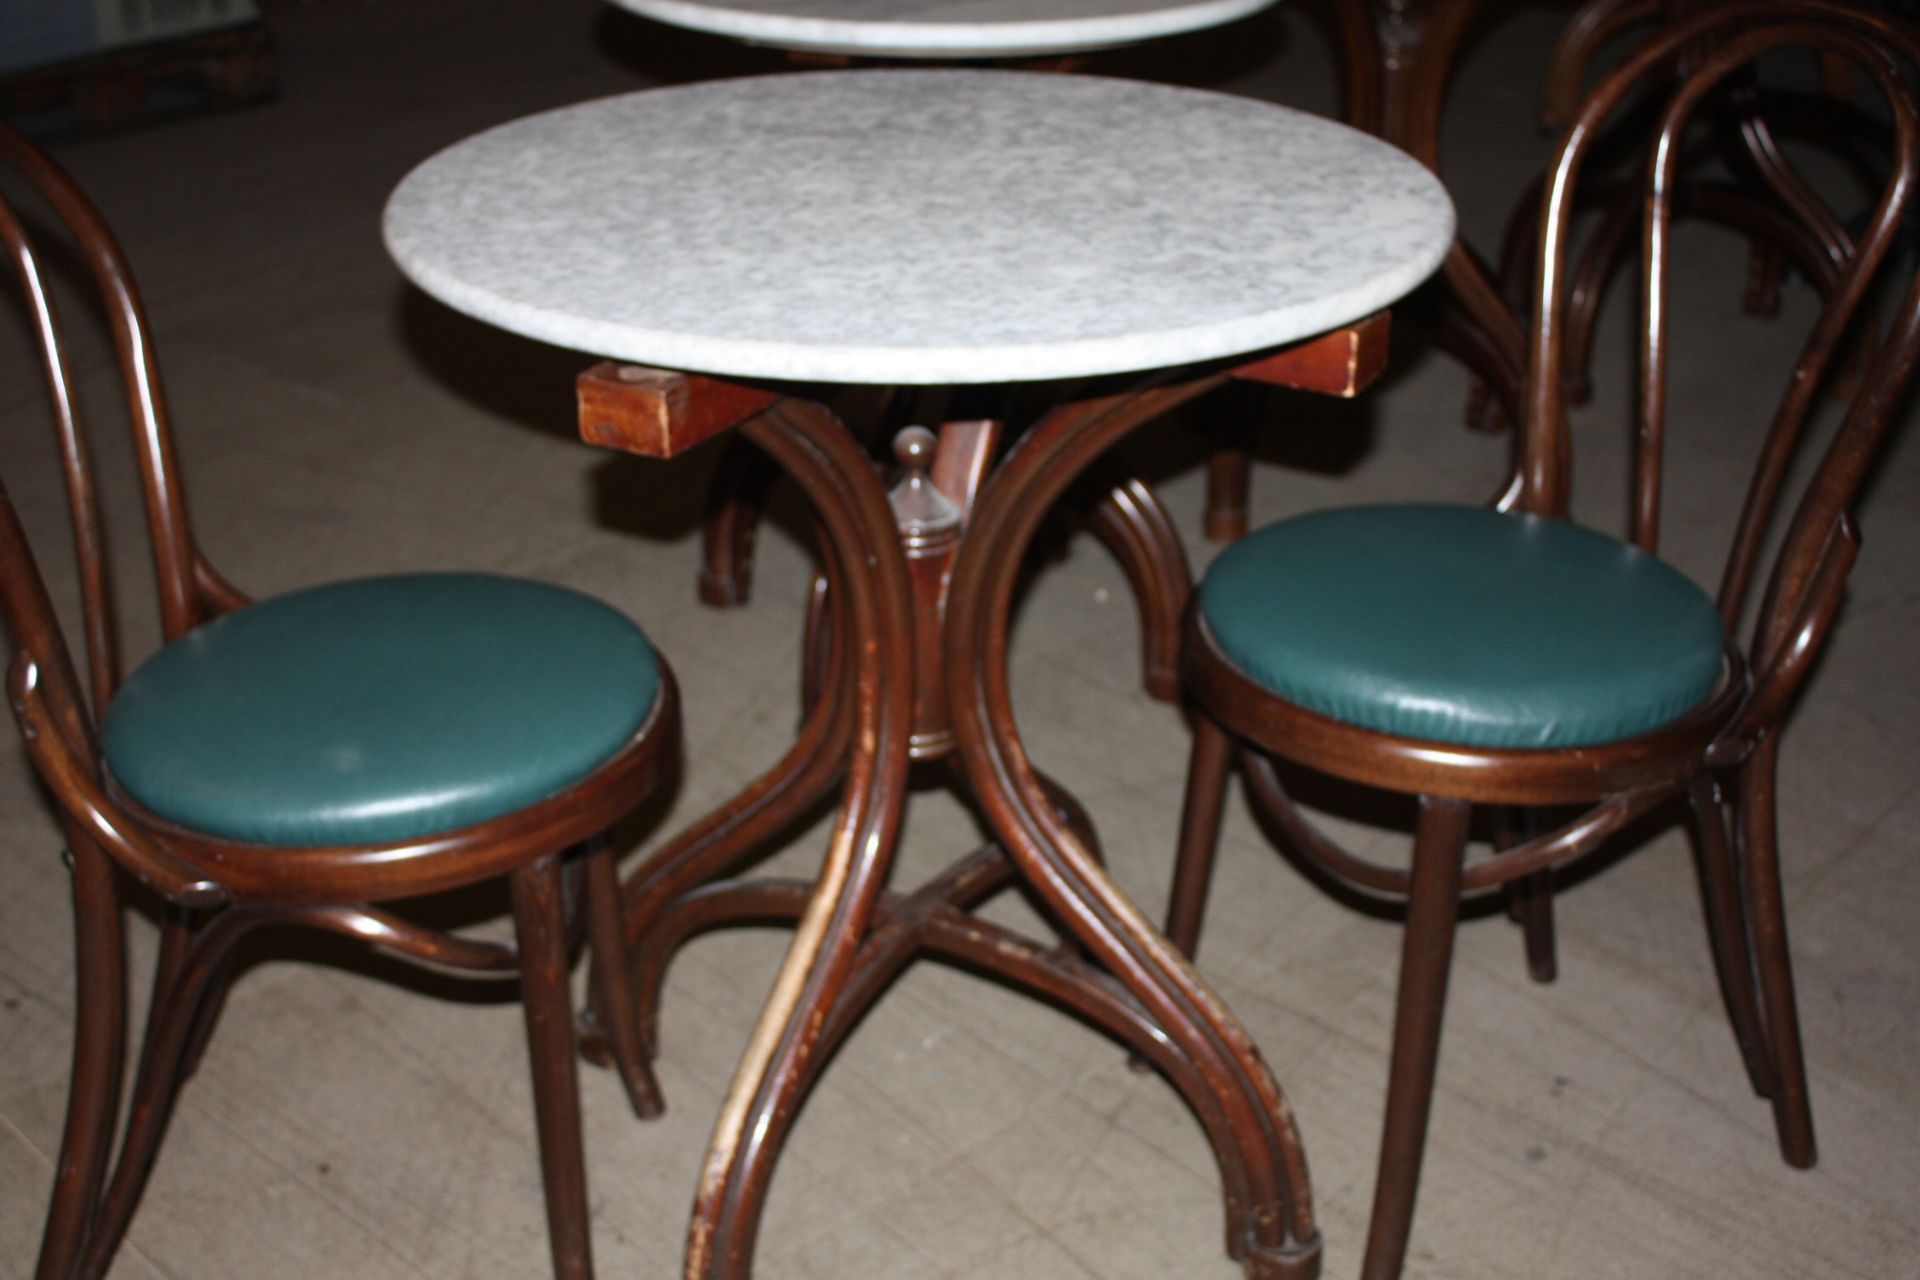 2 x Solid Marble Top Tables 700mm Diameter and 4 x bentwood chairs with green leather upholstery